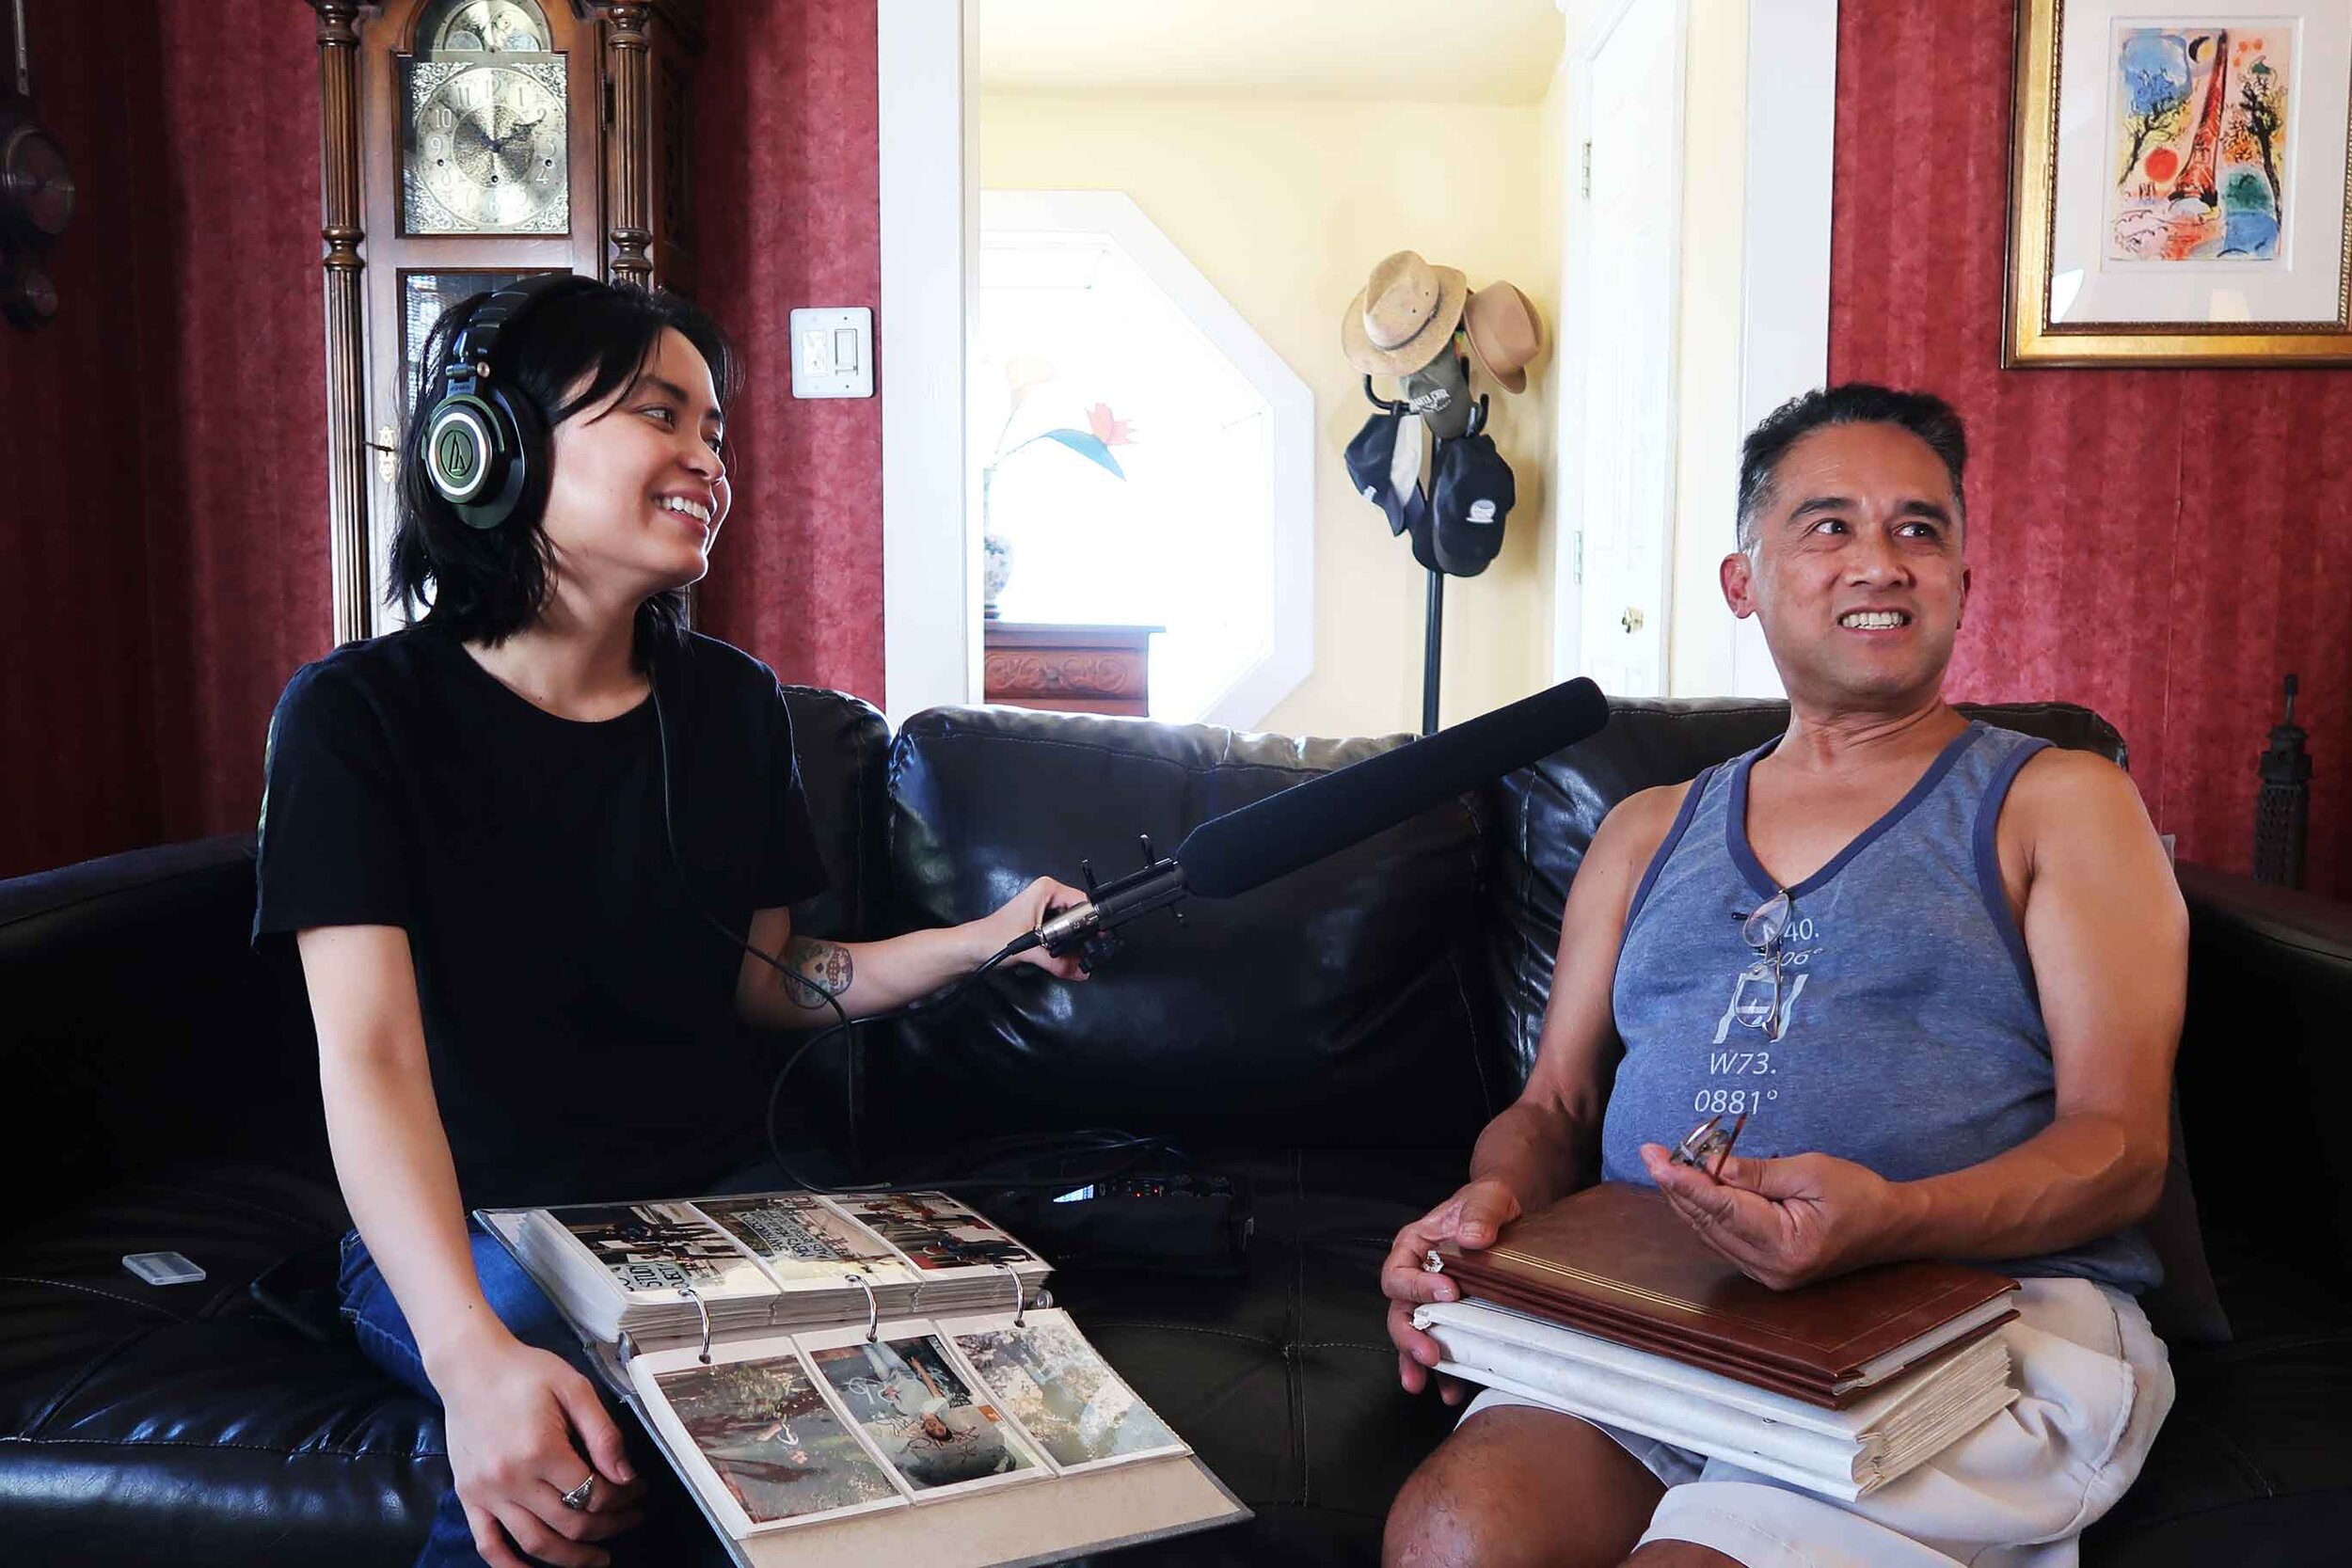  Long Distance host/producer Paola Mardo interviewing Jaime Geaga in his home in Los Angeles, California. Photo by Patrick Epino. 